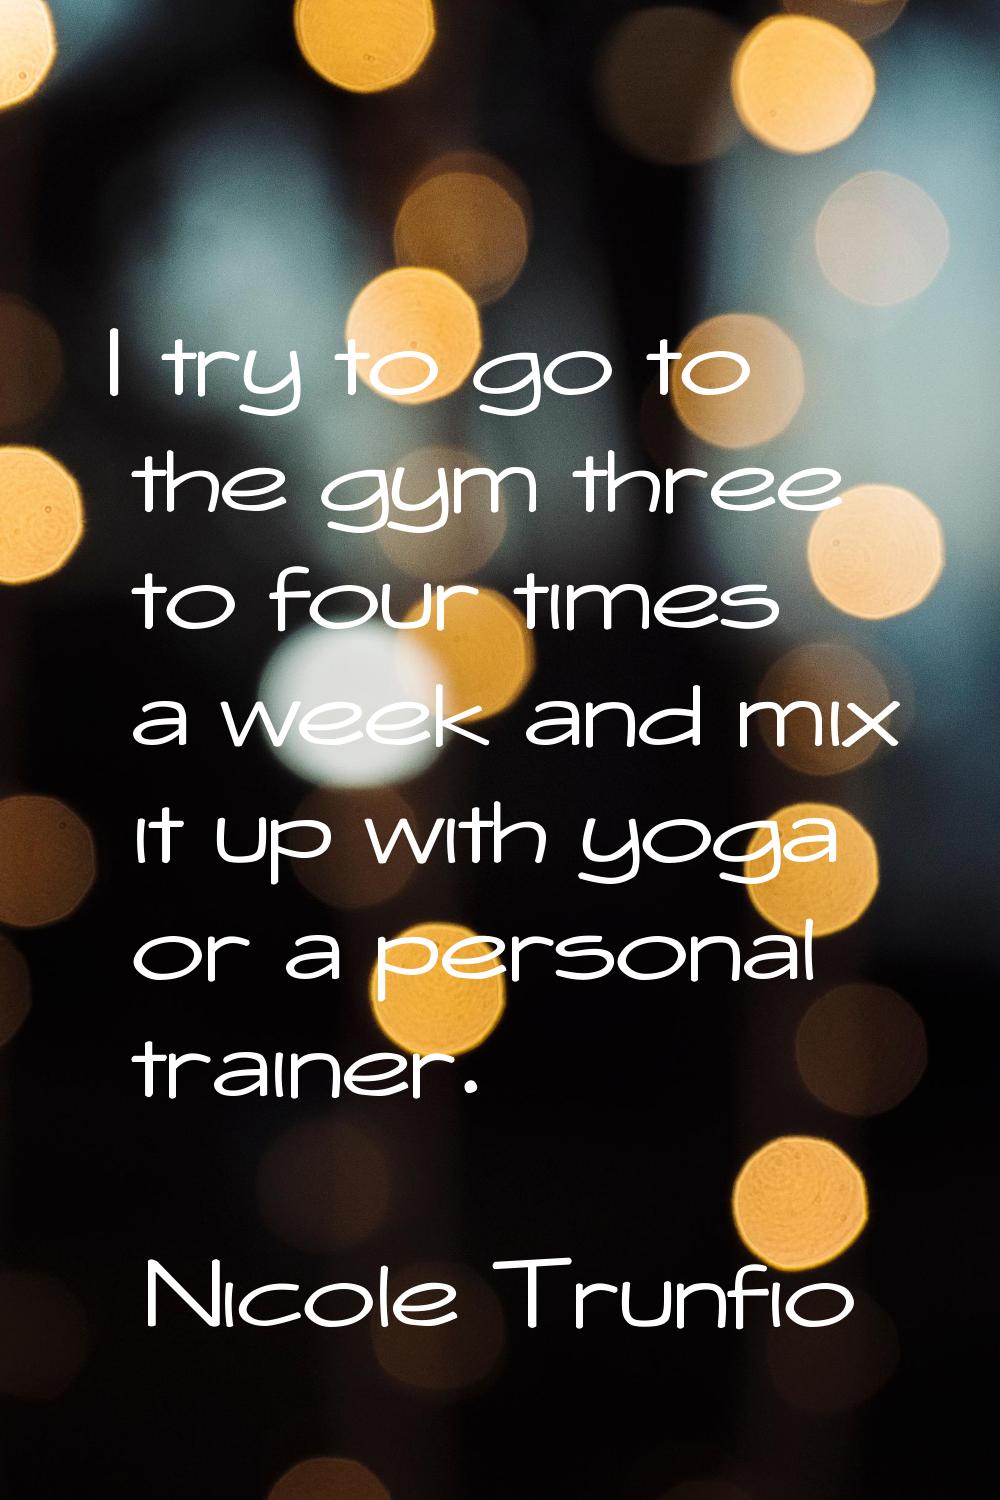 I try to go to the gym three to four times a week and mix it up with yoga or a personal trainer.